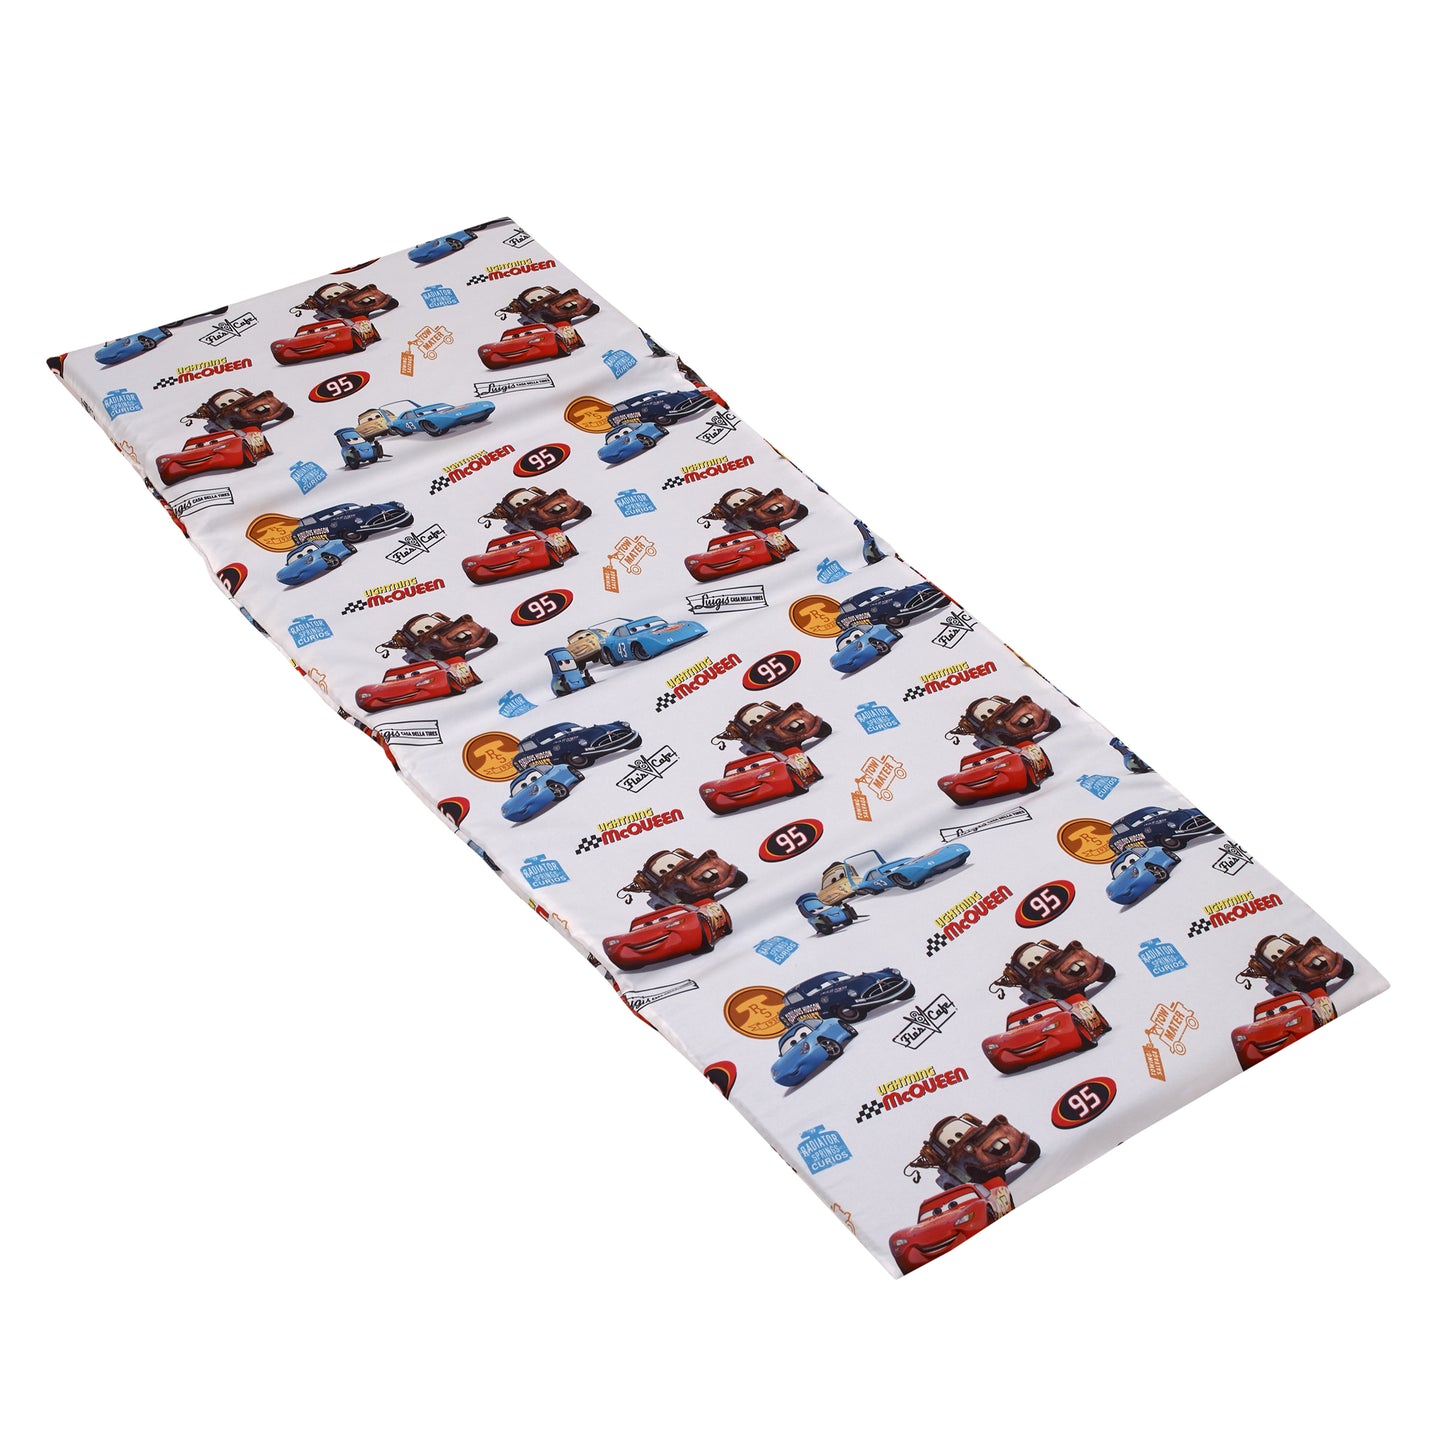 Disney Cars Radiator Springs White, Blue, and Red Lightning McQueen and Tow-Mater Preschool Nap Pad Sheet